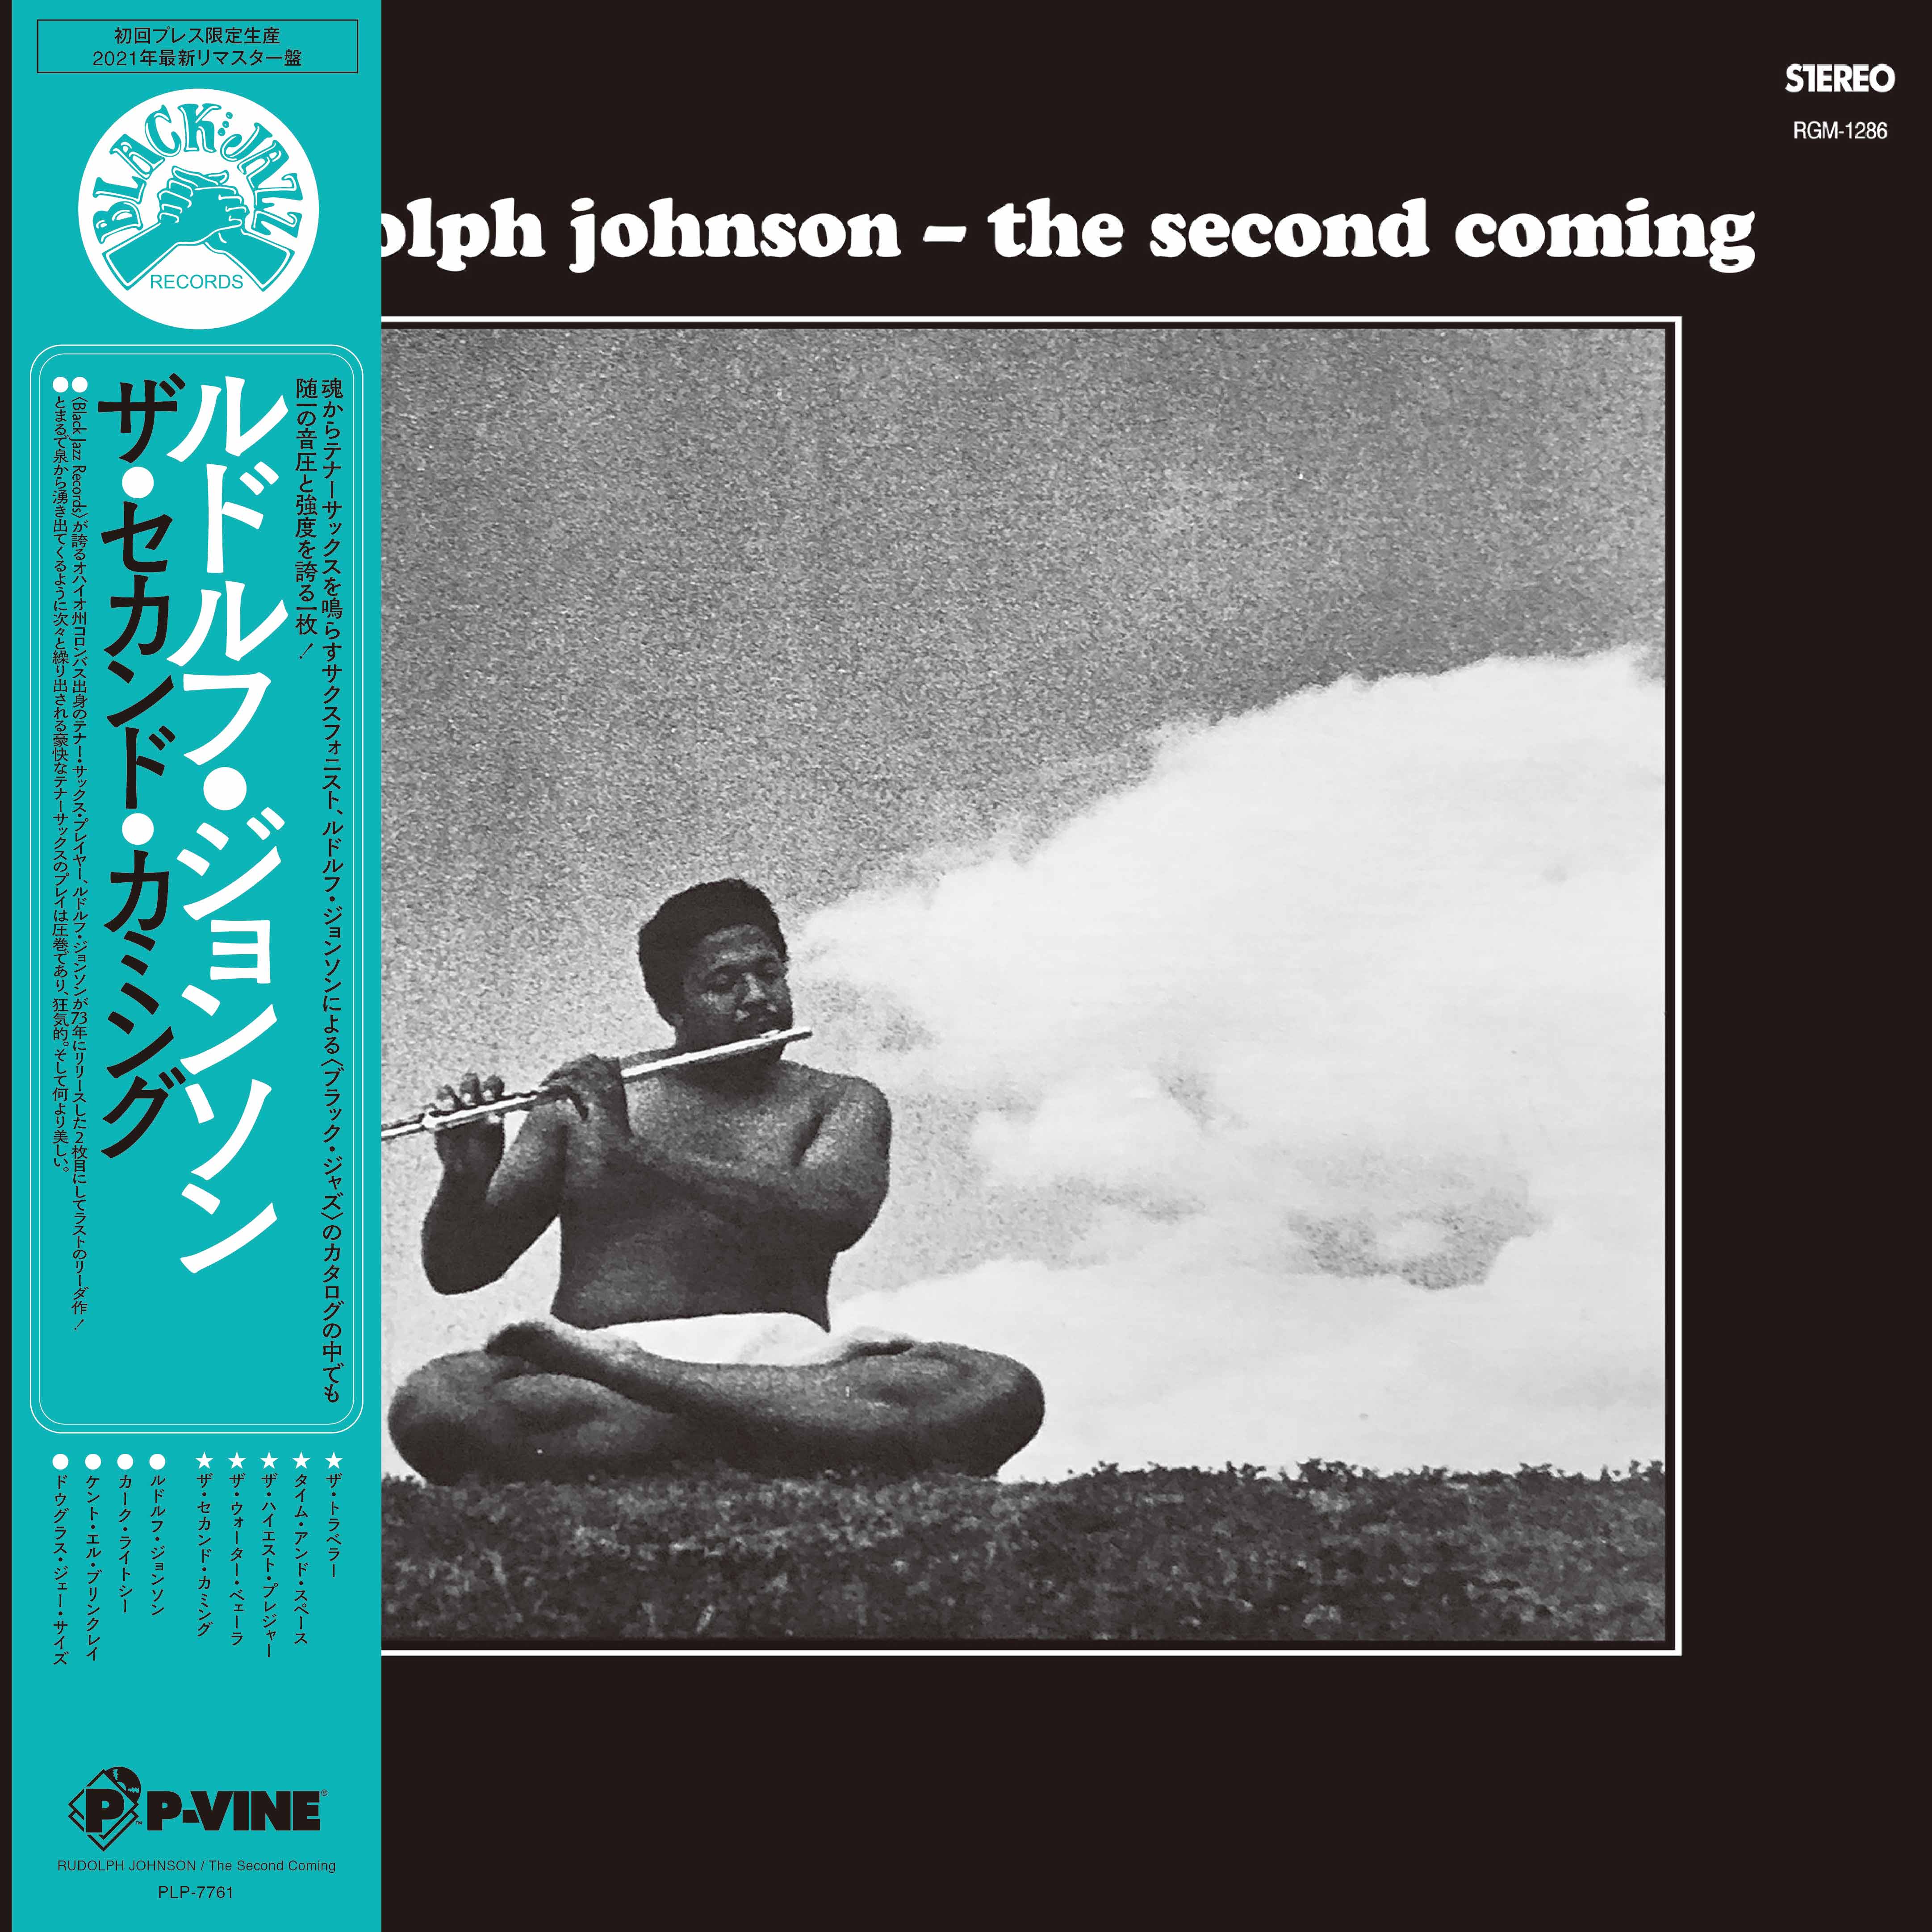 RUDOLPH JOHNSON「The Second Coming」